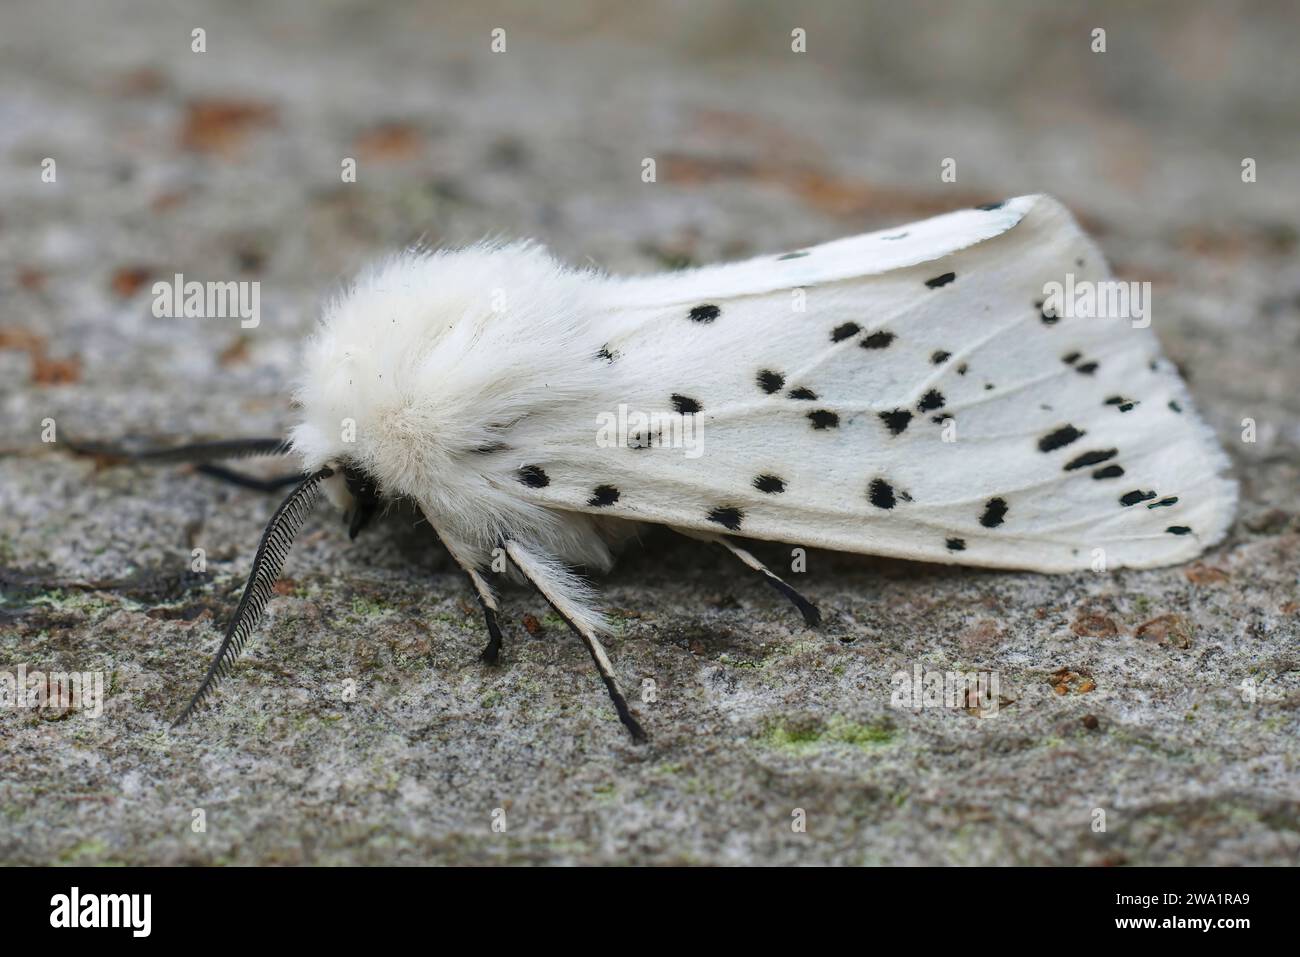 Natural closeup on a white ermine moth, Spilosoma lubricipeda sitting on a piece of wood in the garden Stock Photo